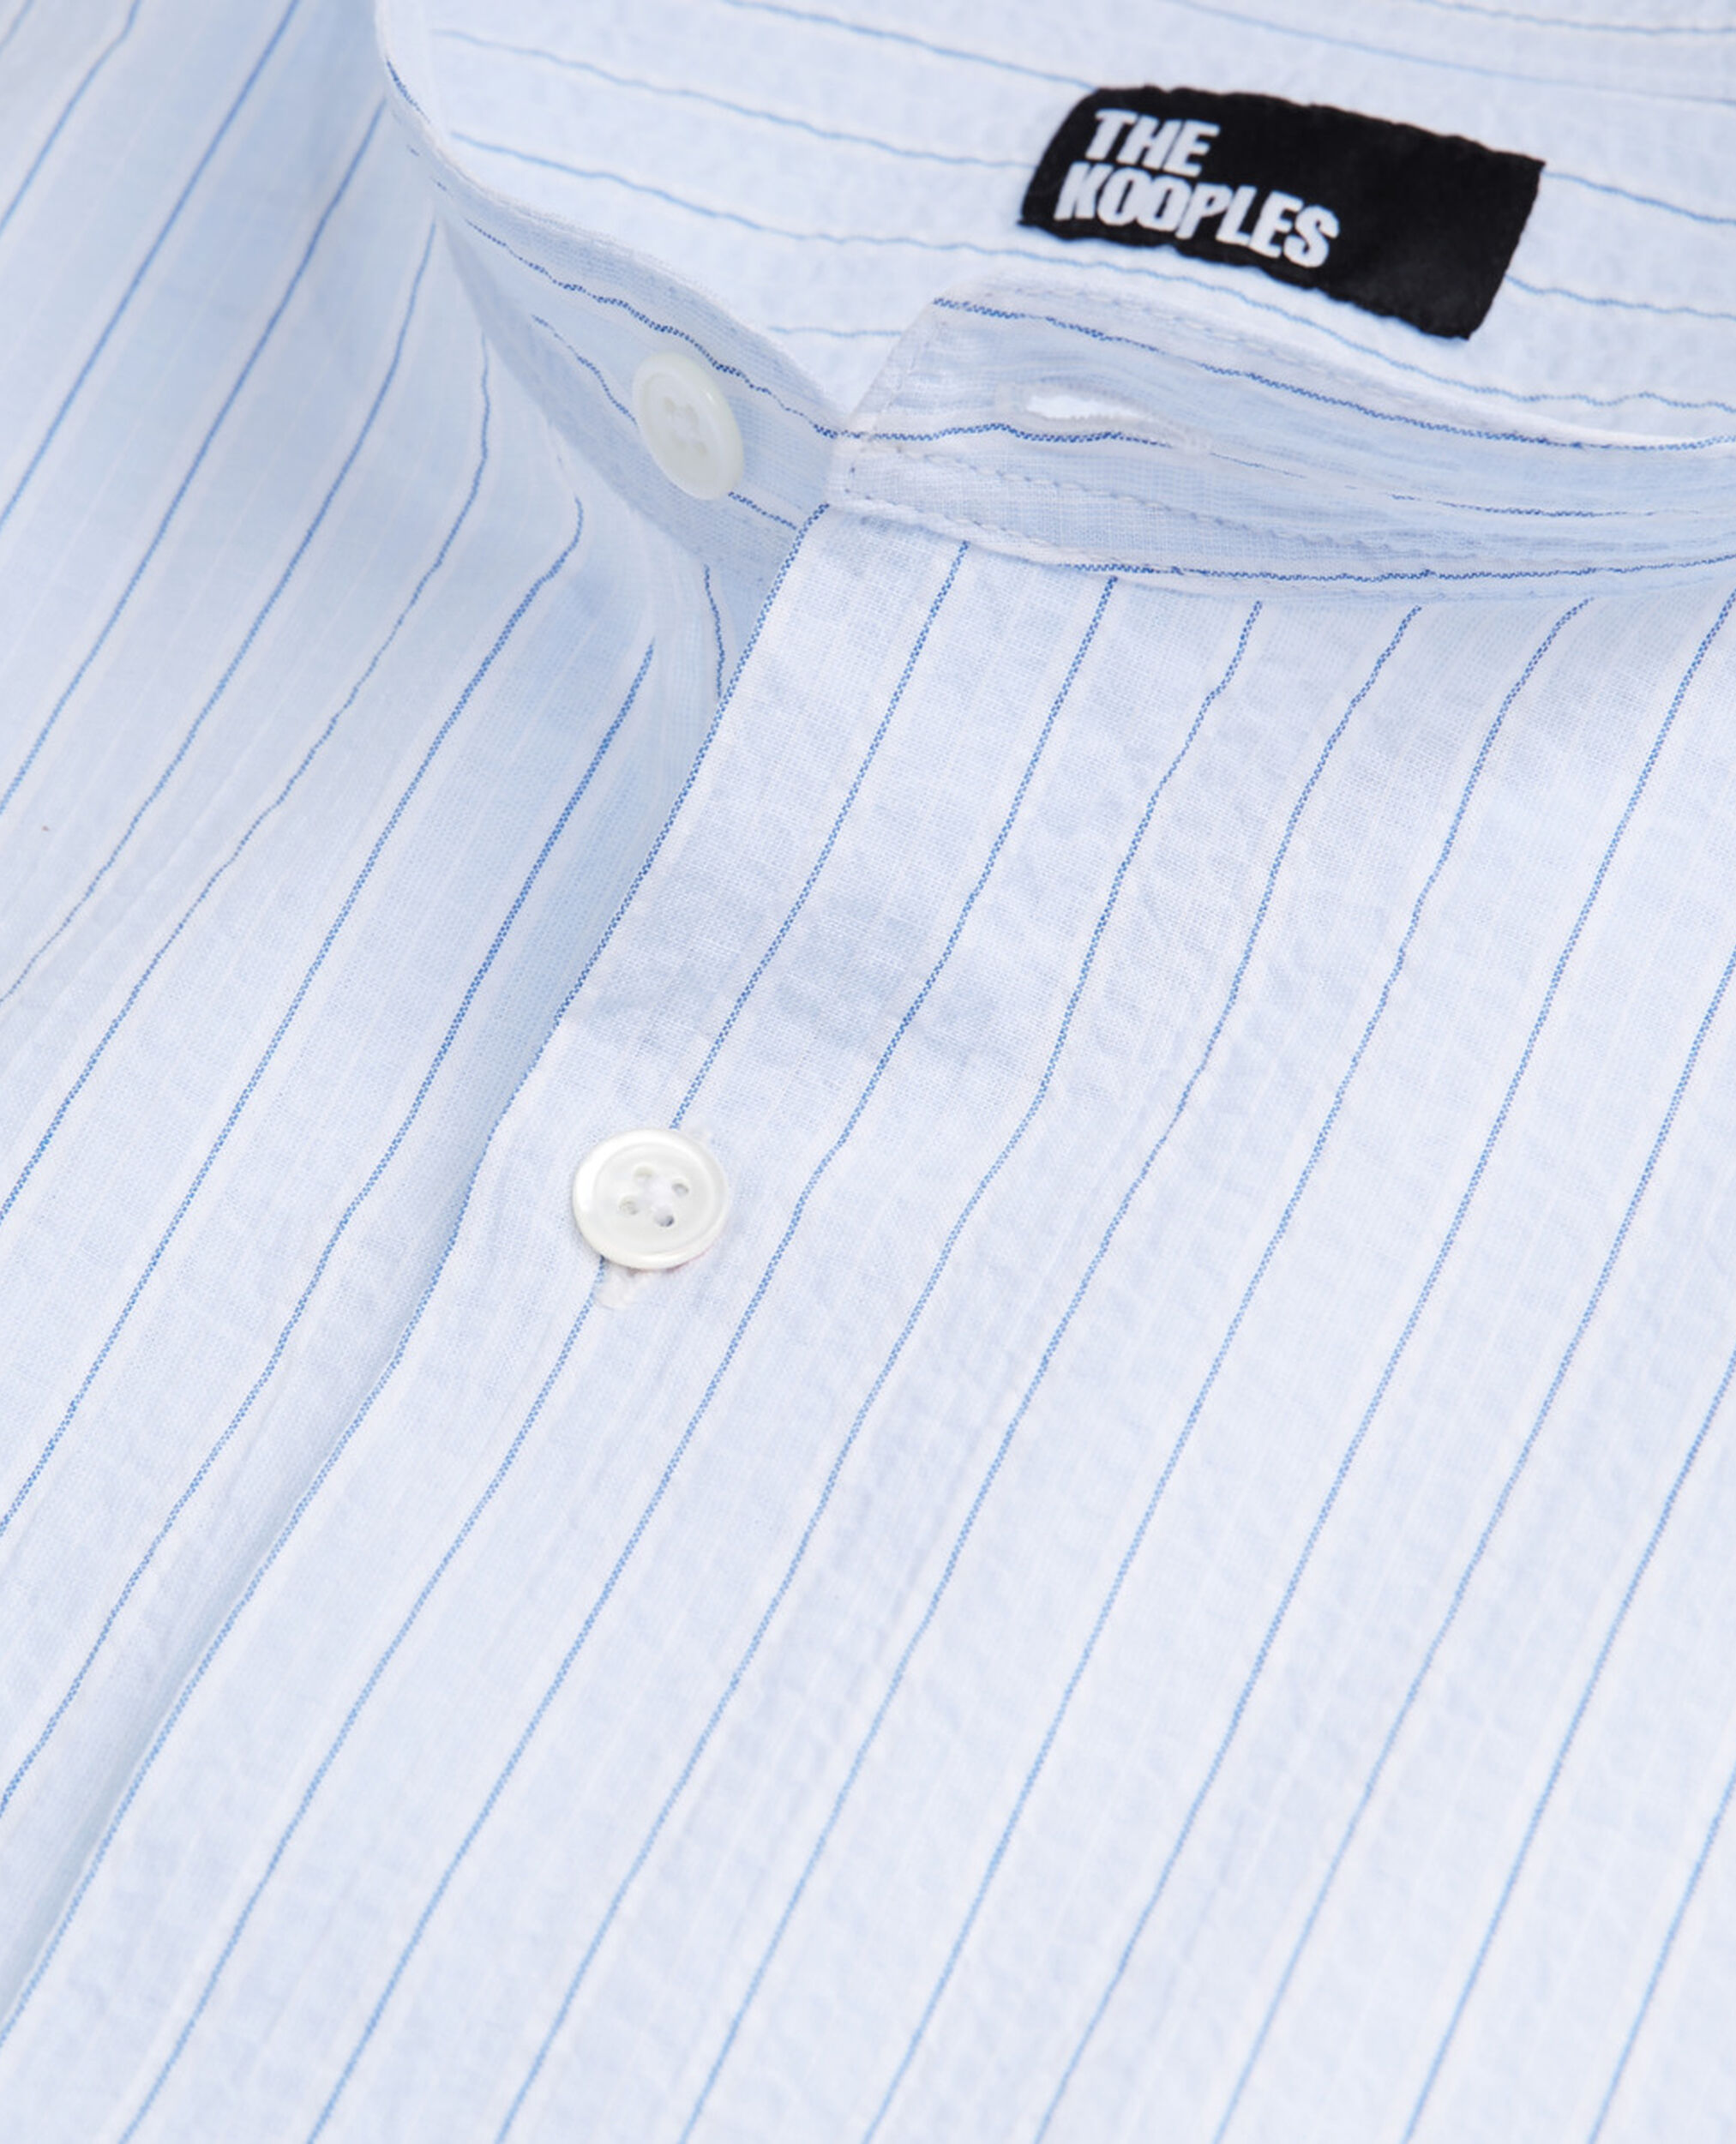 Camisa rayas con cuello Mao, WHITE / SKY BLUE, hi-res image number null